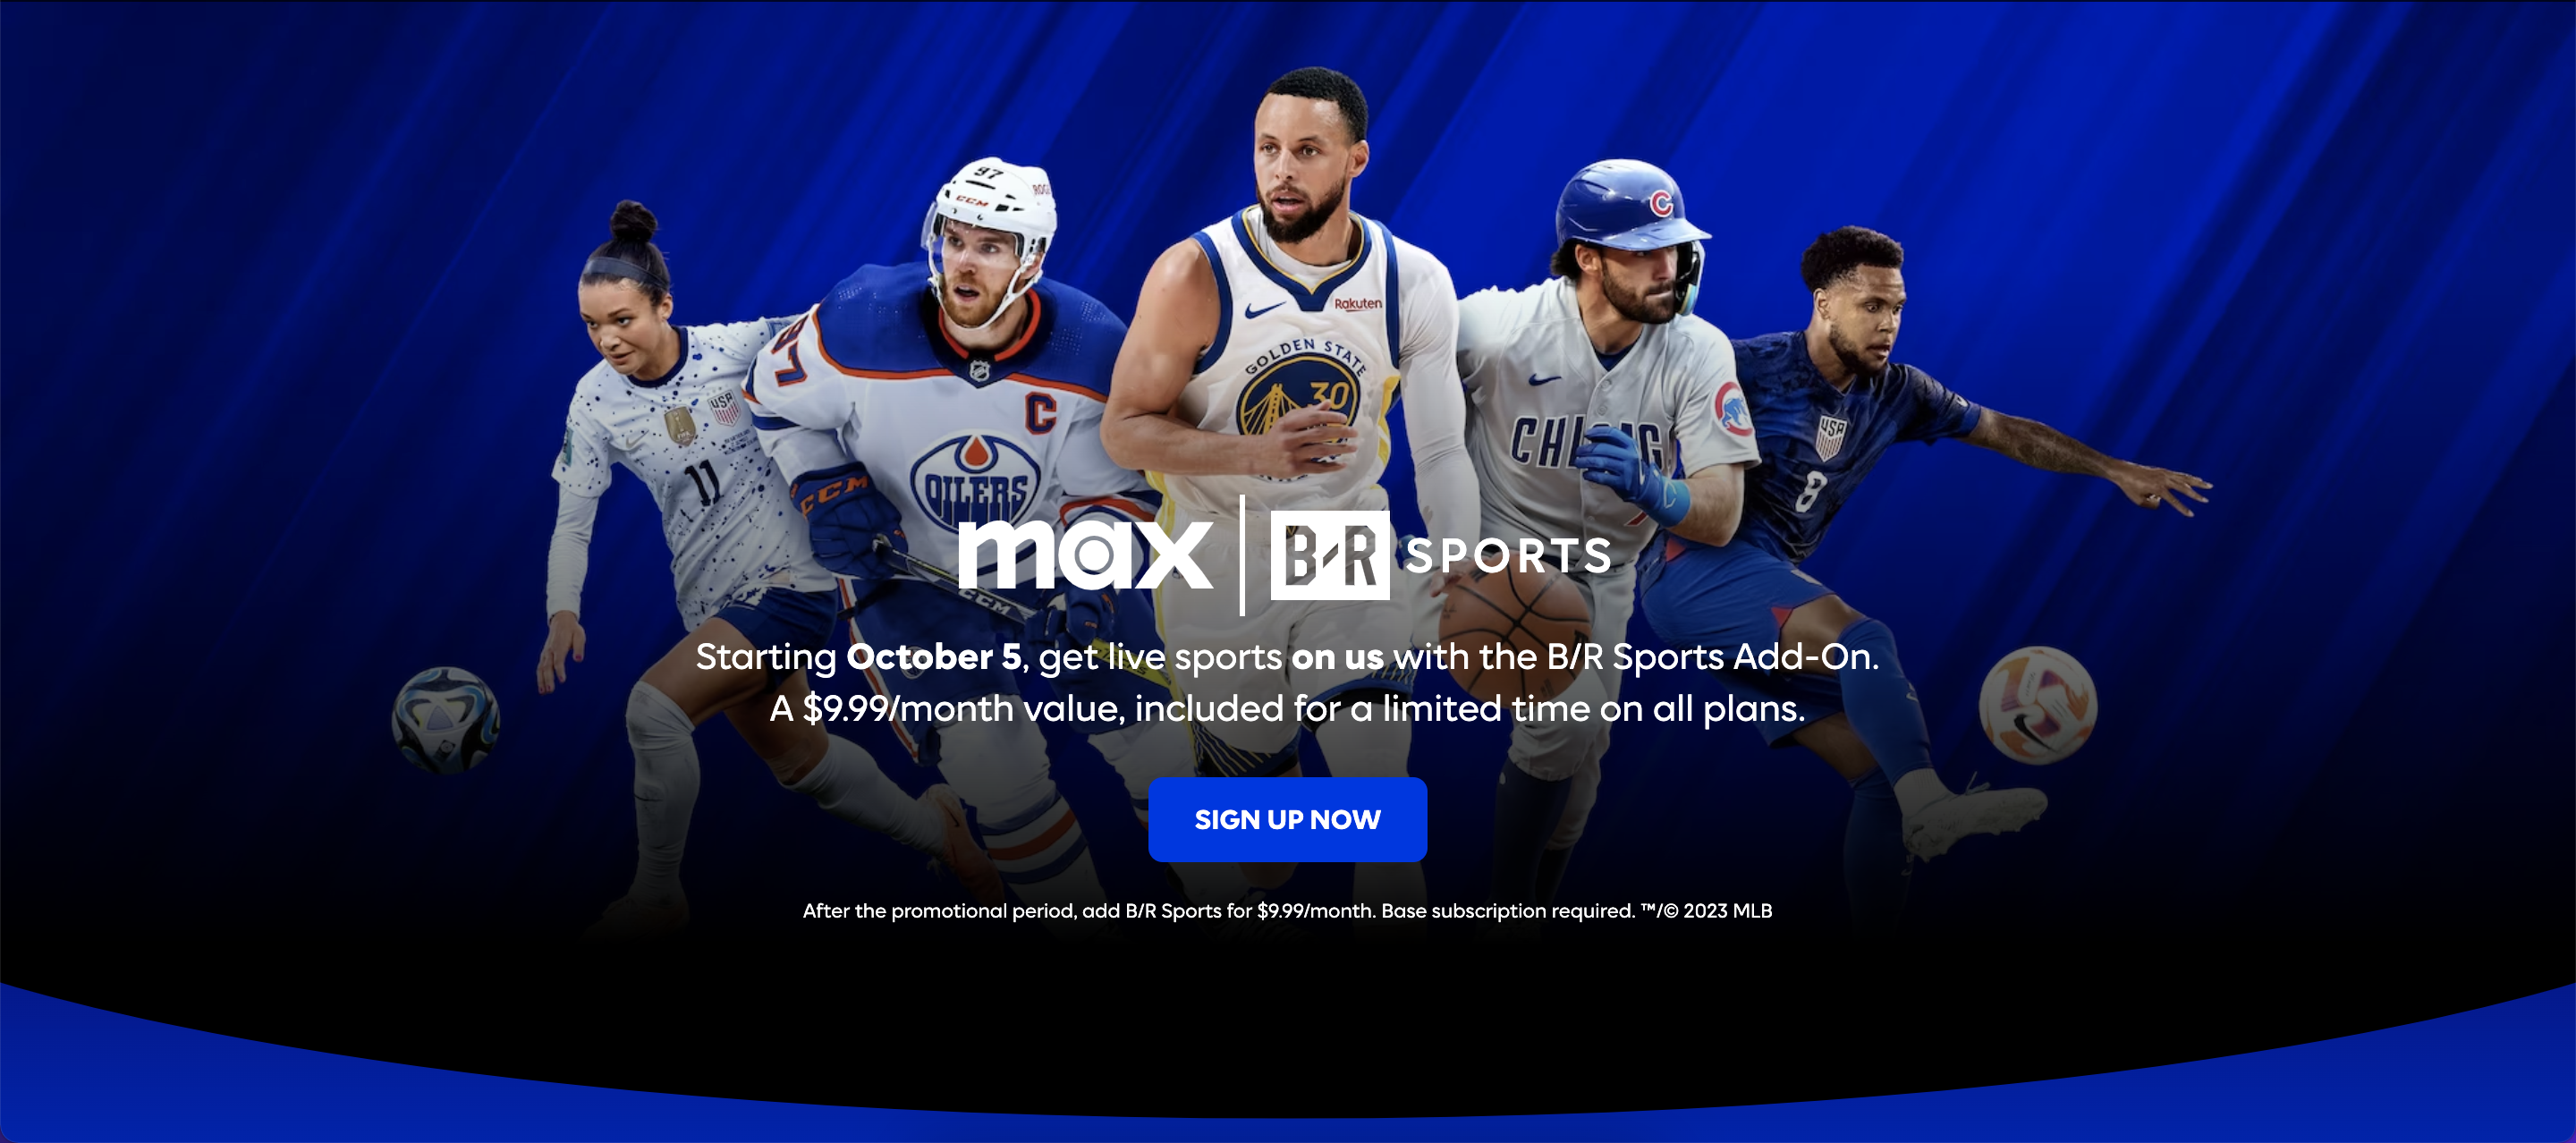 B/R Live Streaming Service Brings Bleacher Report Into Live TV